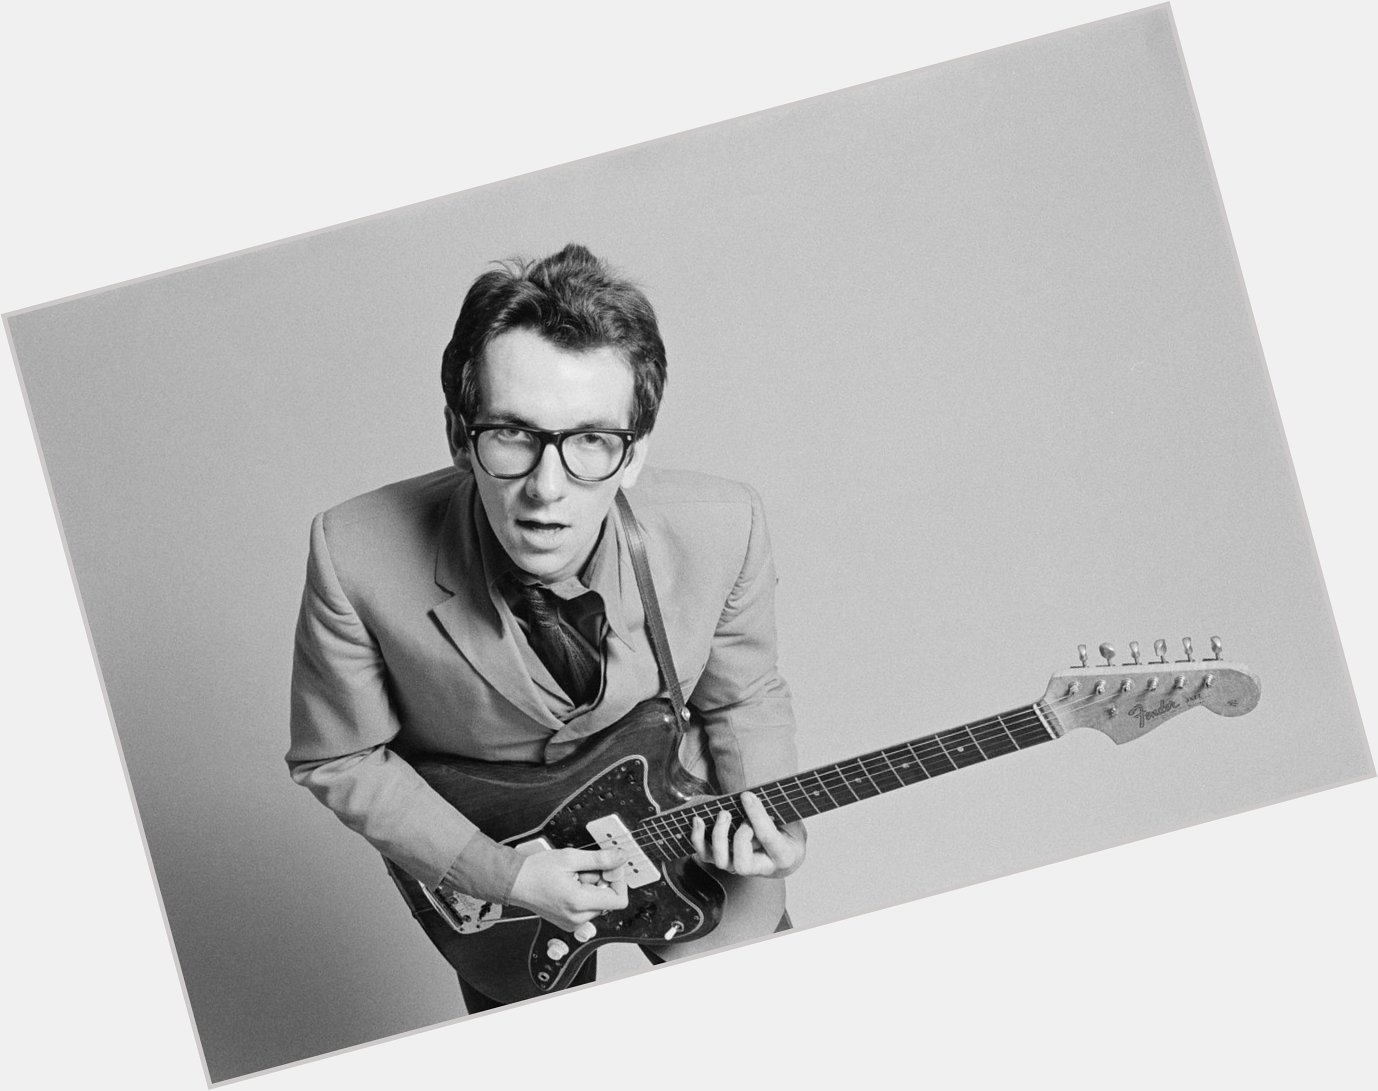 Happy birthday to Rock and Roll Hall of Famer, Elvis Costello! 